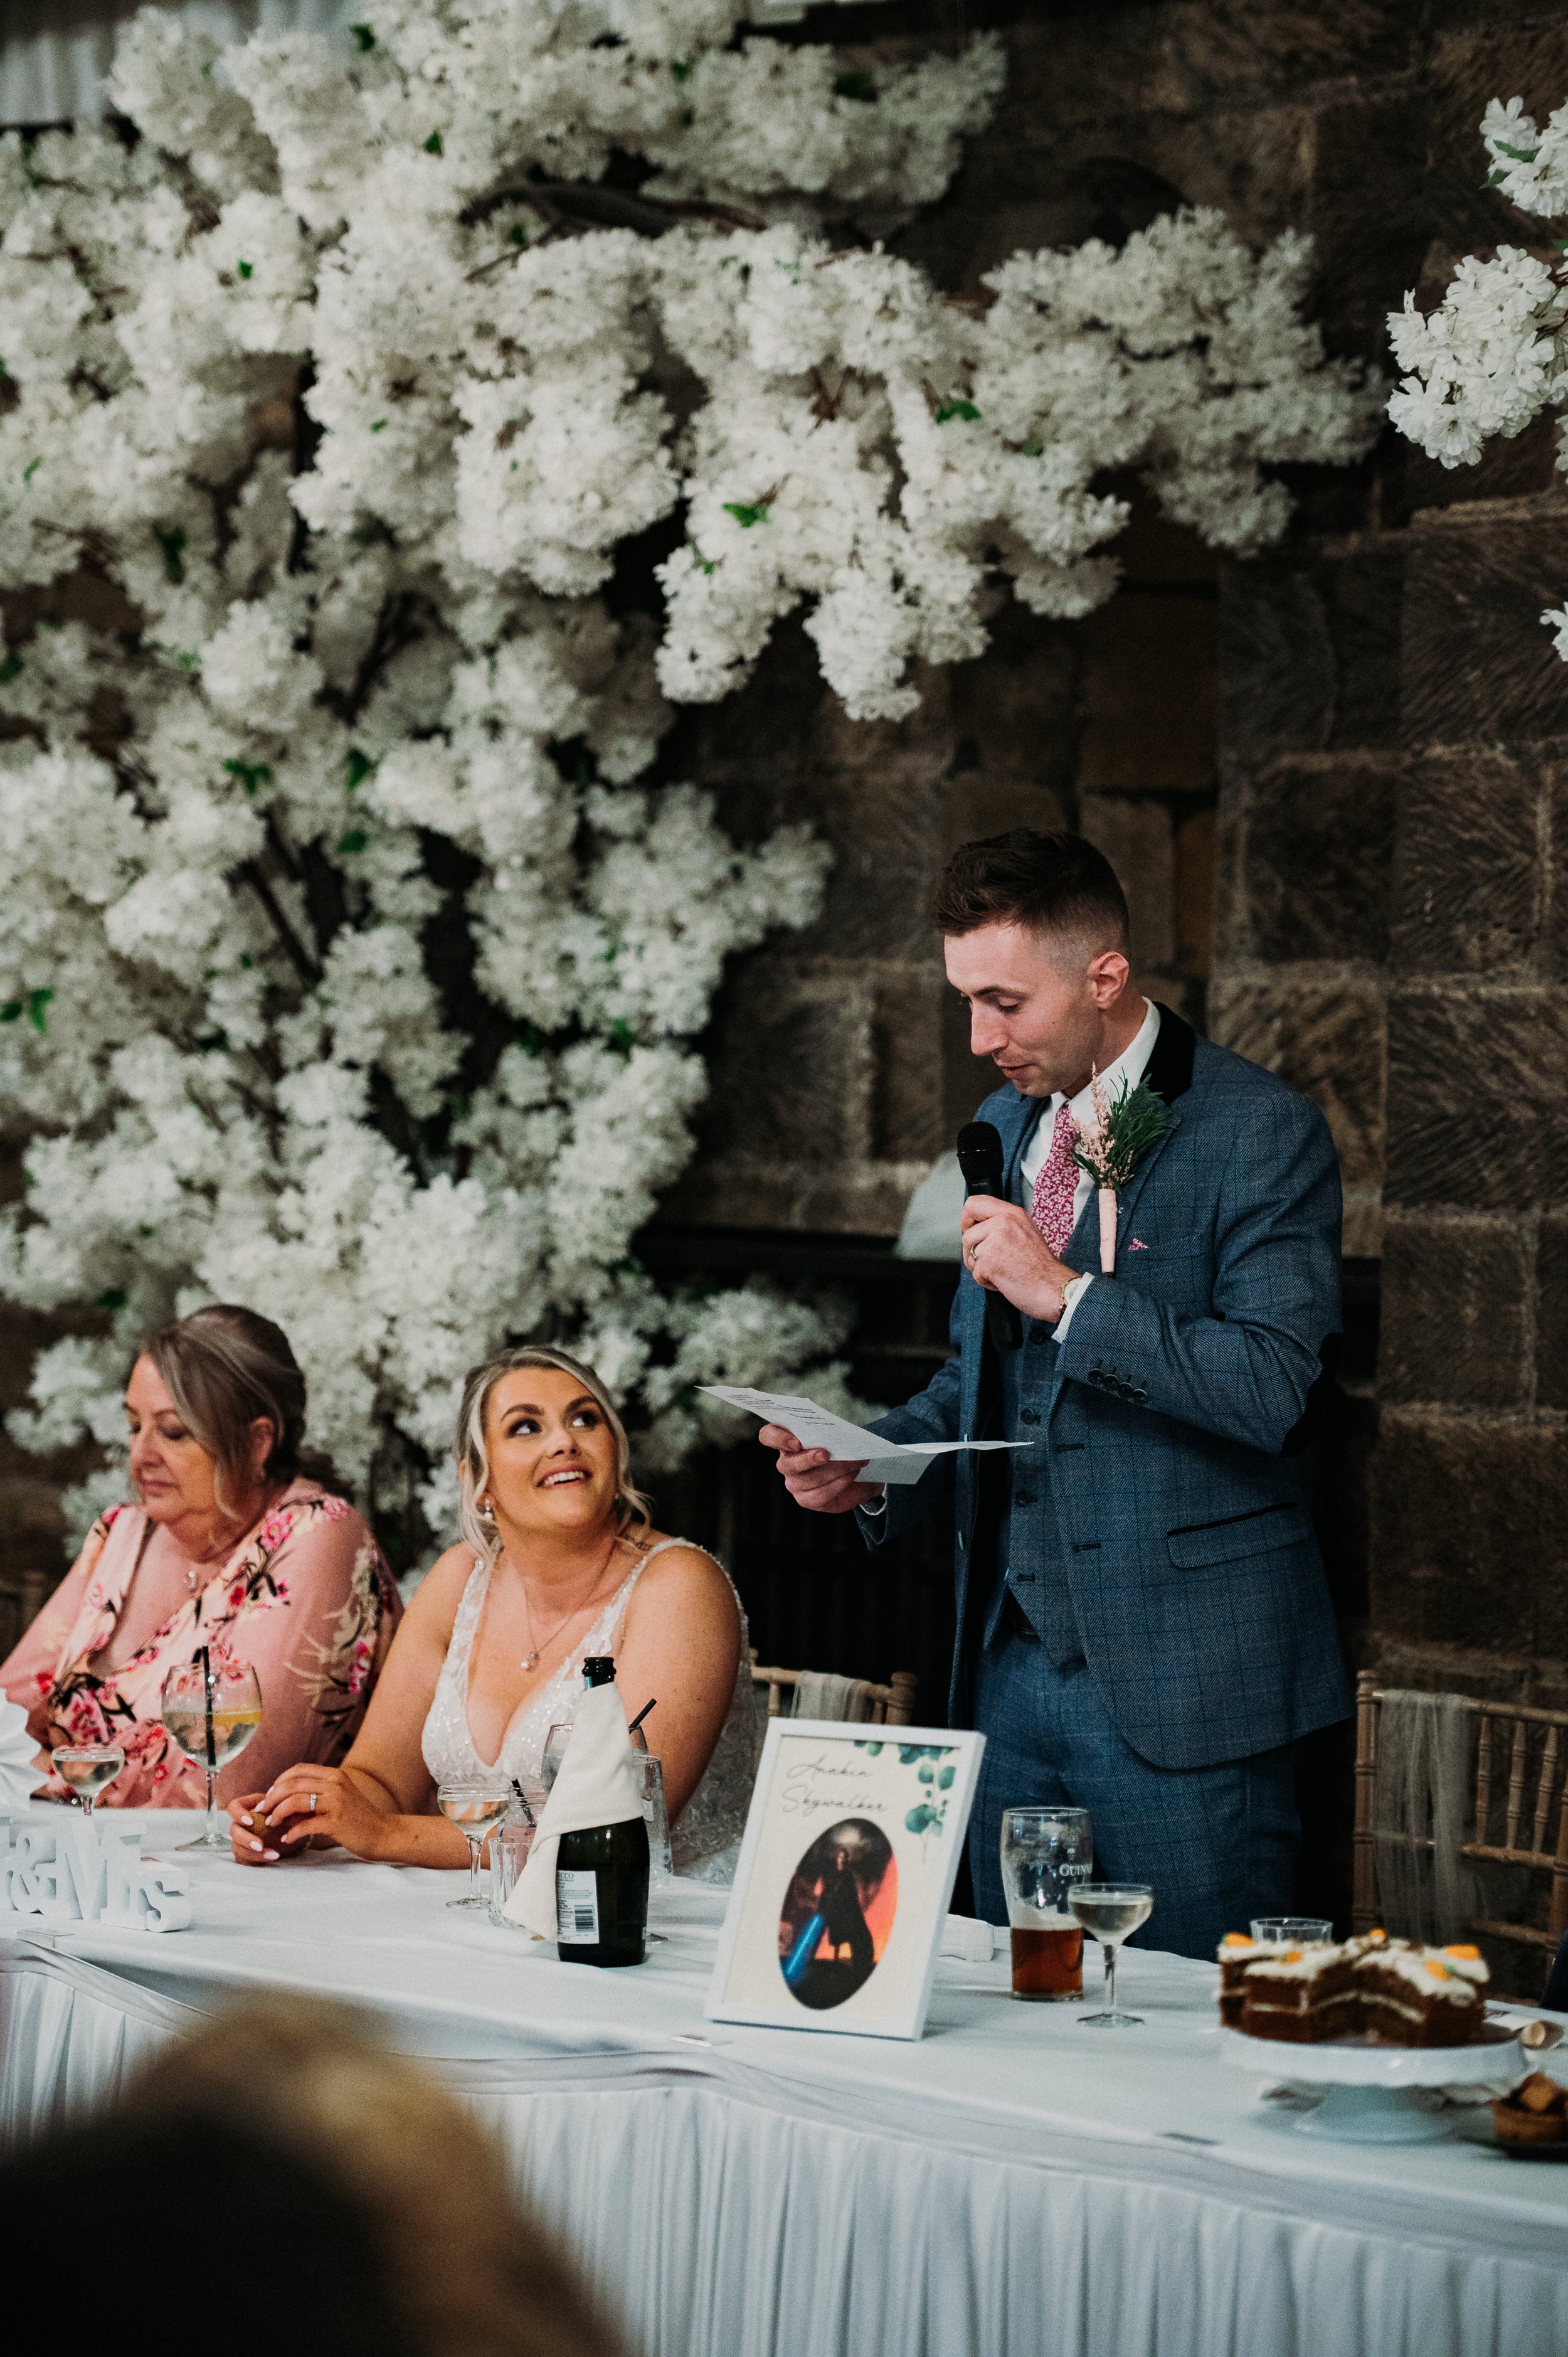 The groom gives his speech after their meal at Sneaton Castle, Whitby.